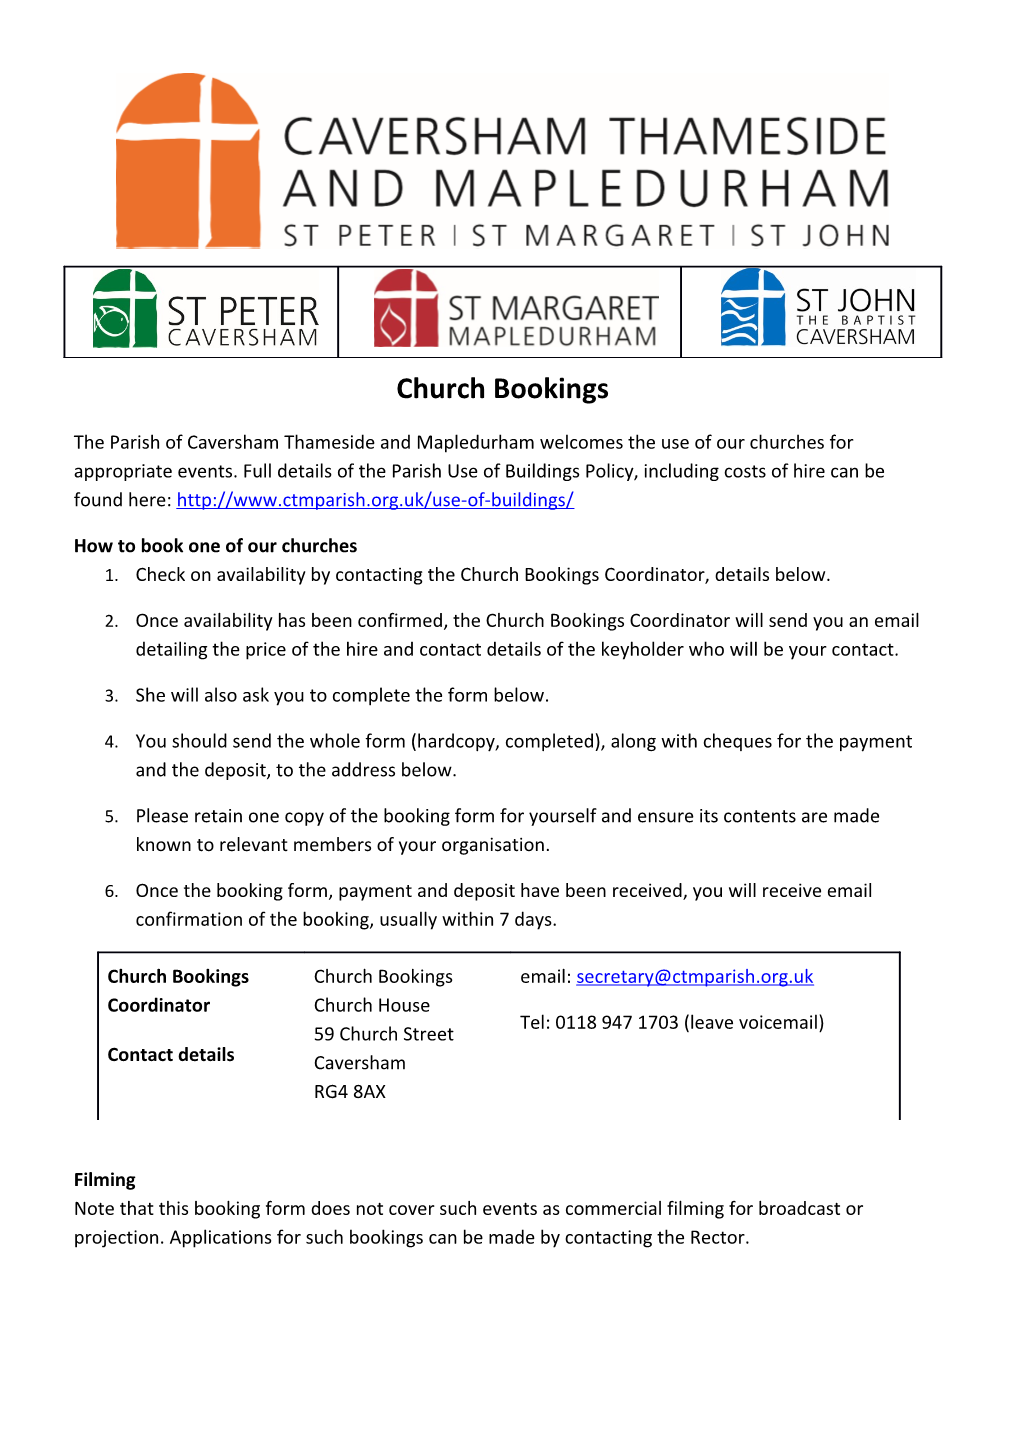 How to Book One of Our Churches